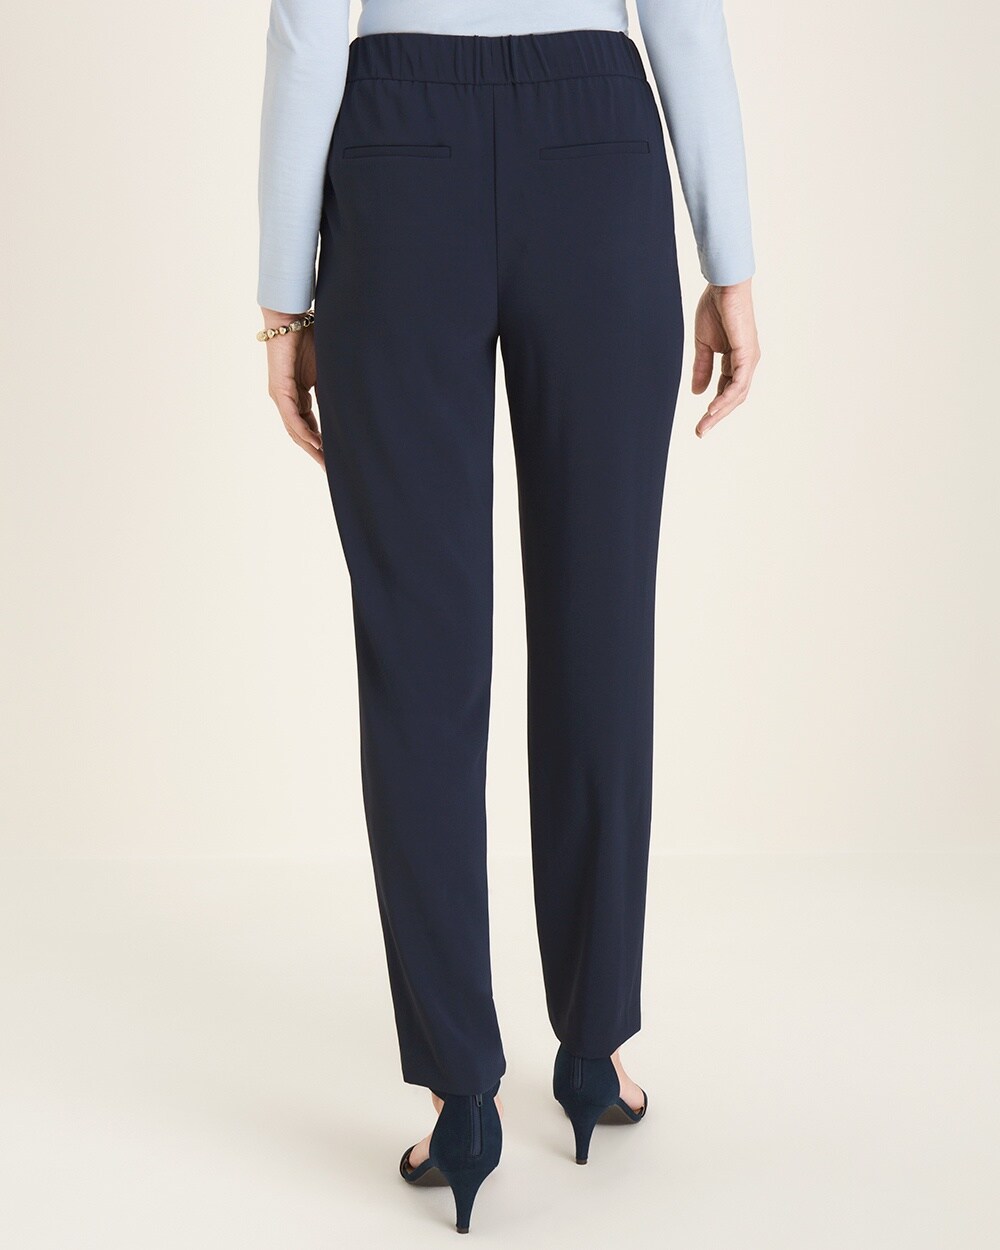 Relaxed Drawstring Ankle Pants - Chico's